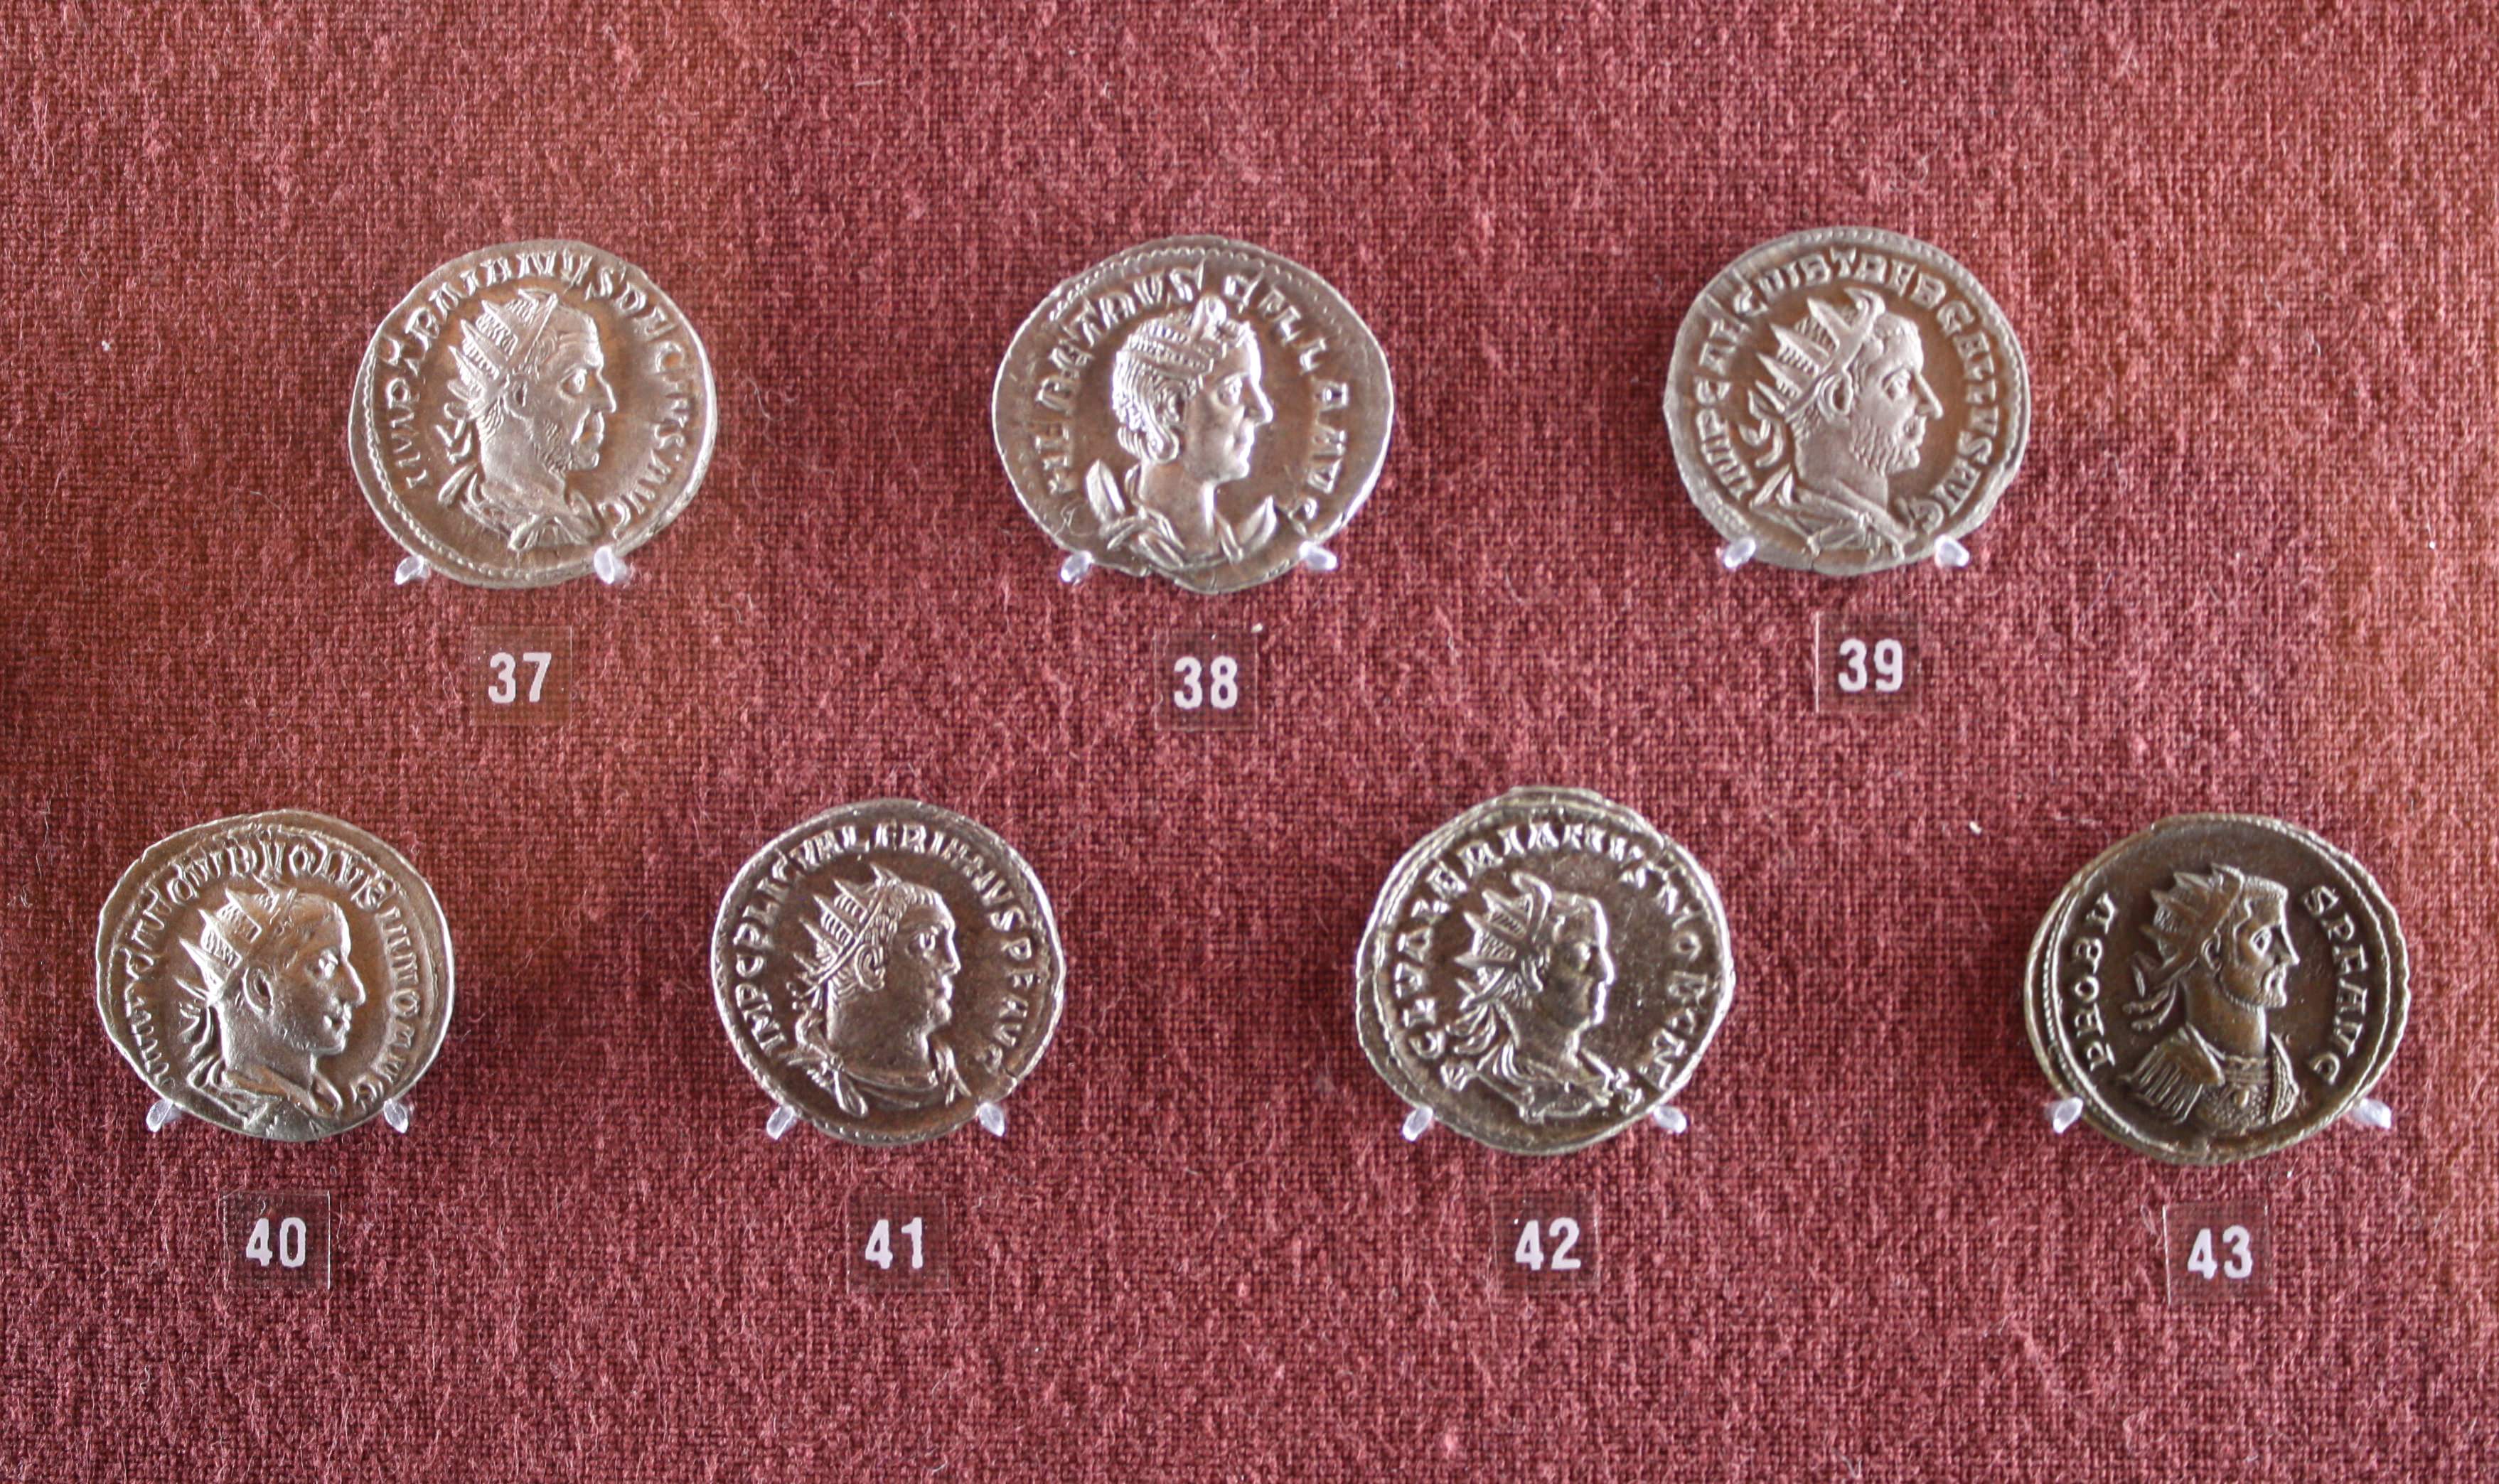 Dating Roman Silver Coins: Getting to the True Composition